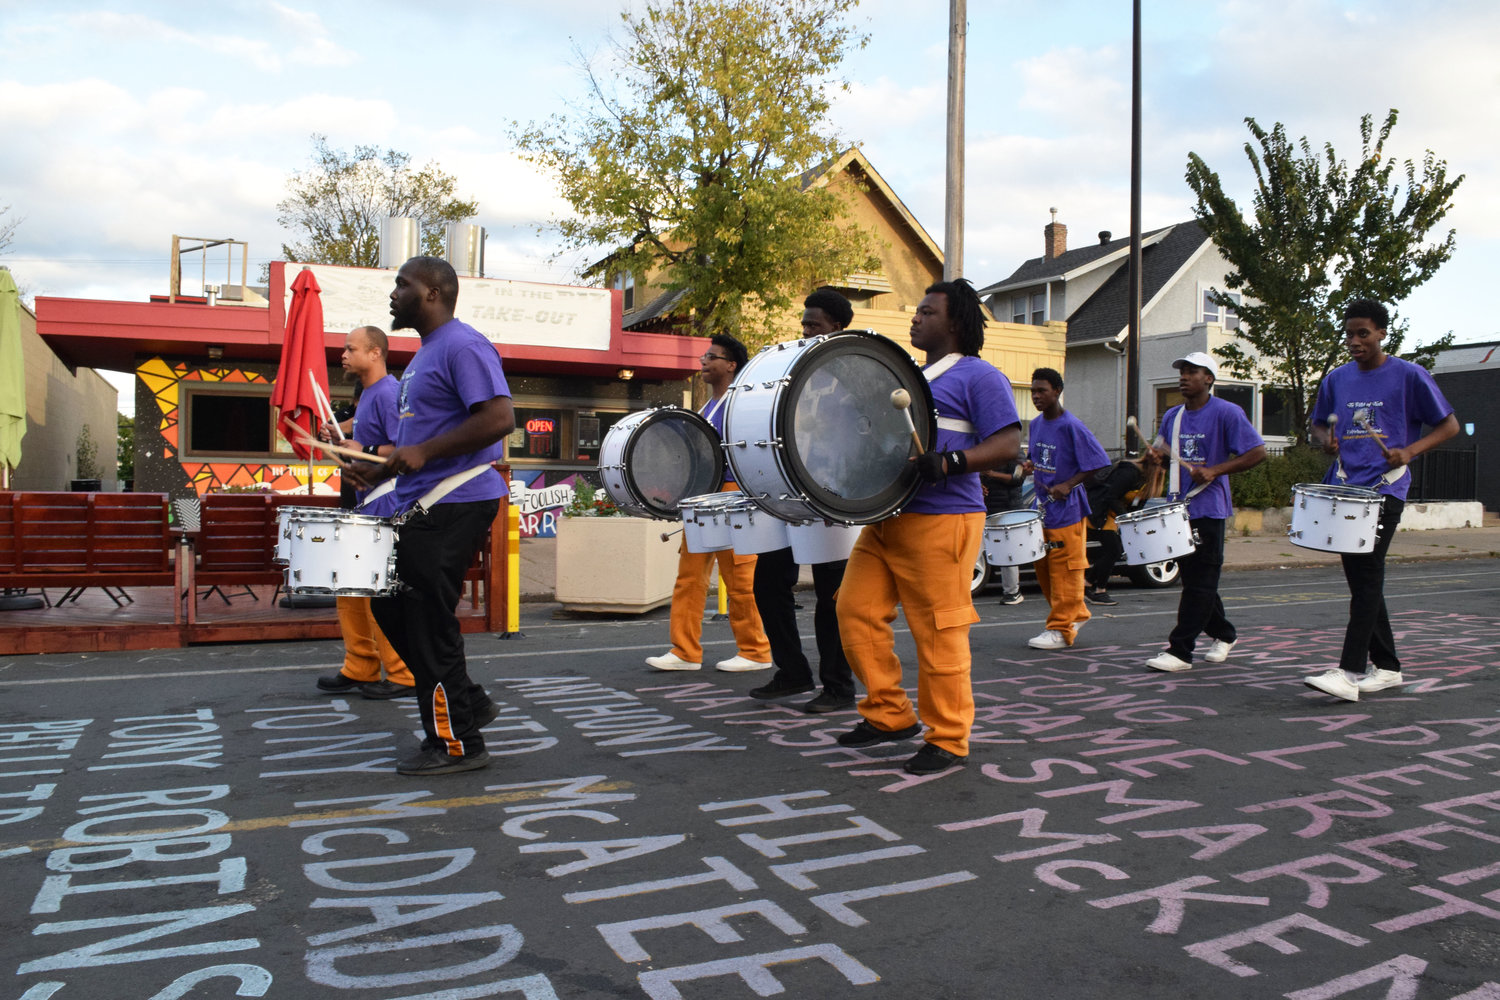 The Lions of Judah Drum Drill Team march their rhythms up Chicago Ave. (Photo by Jill Boogren)